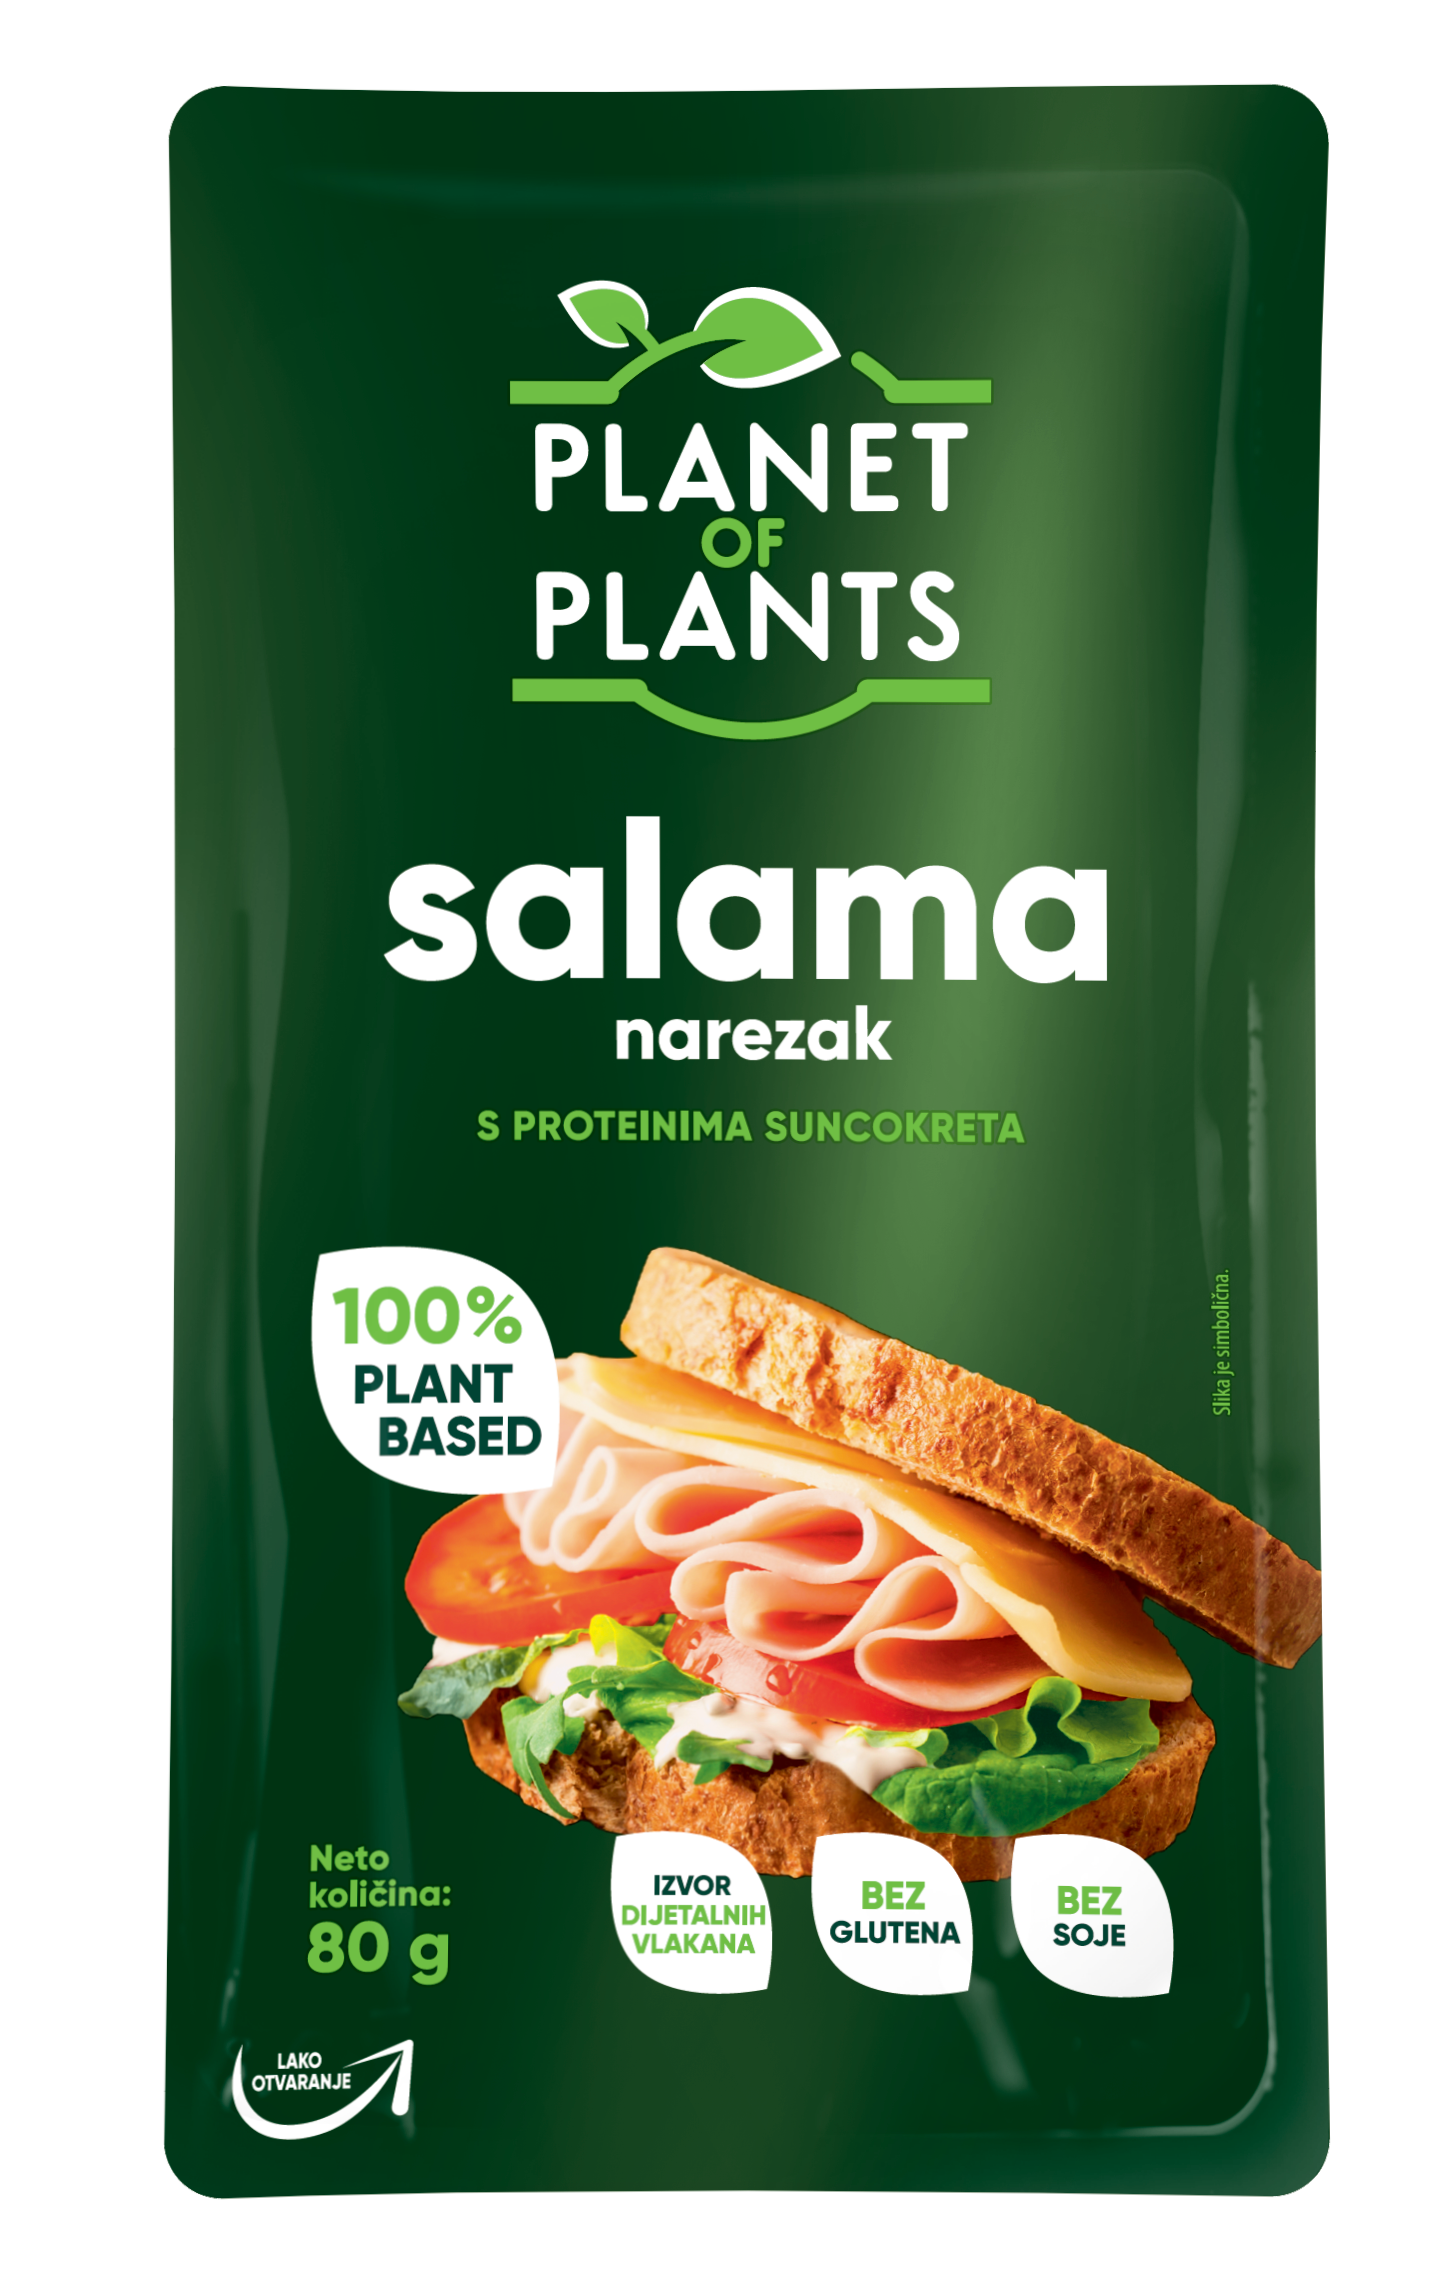 planet of plants sliced salami product